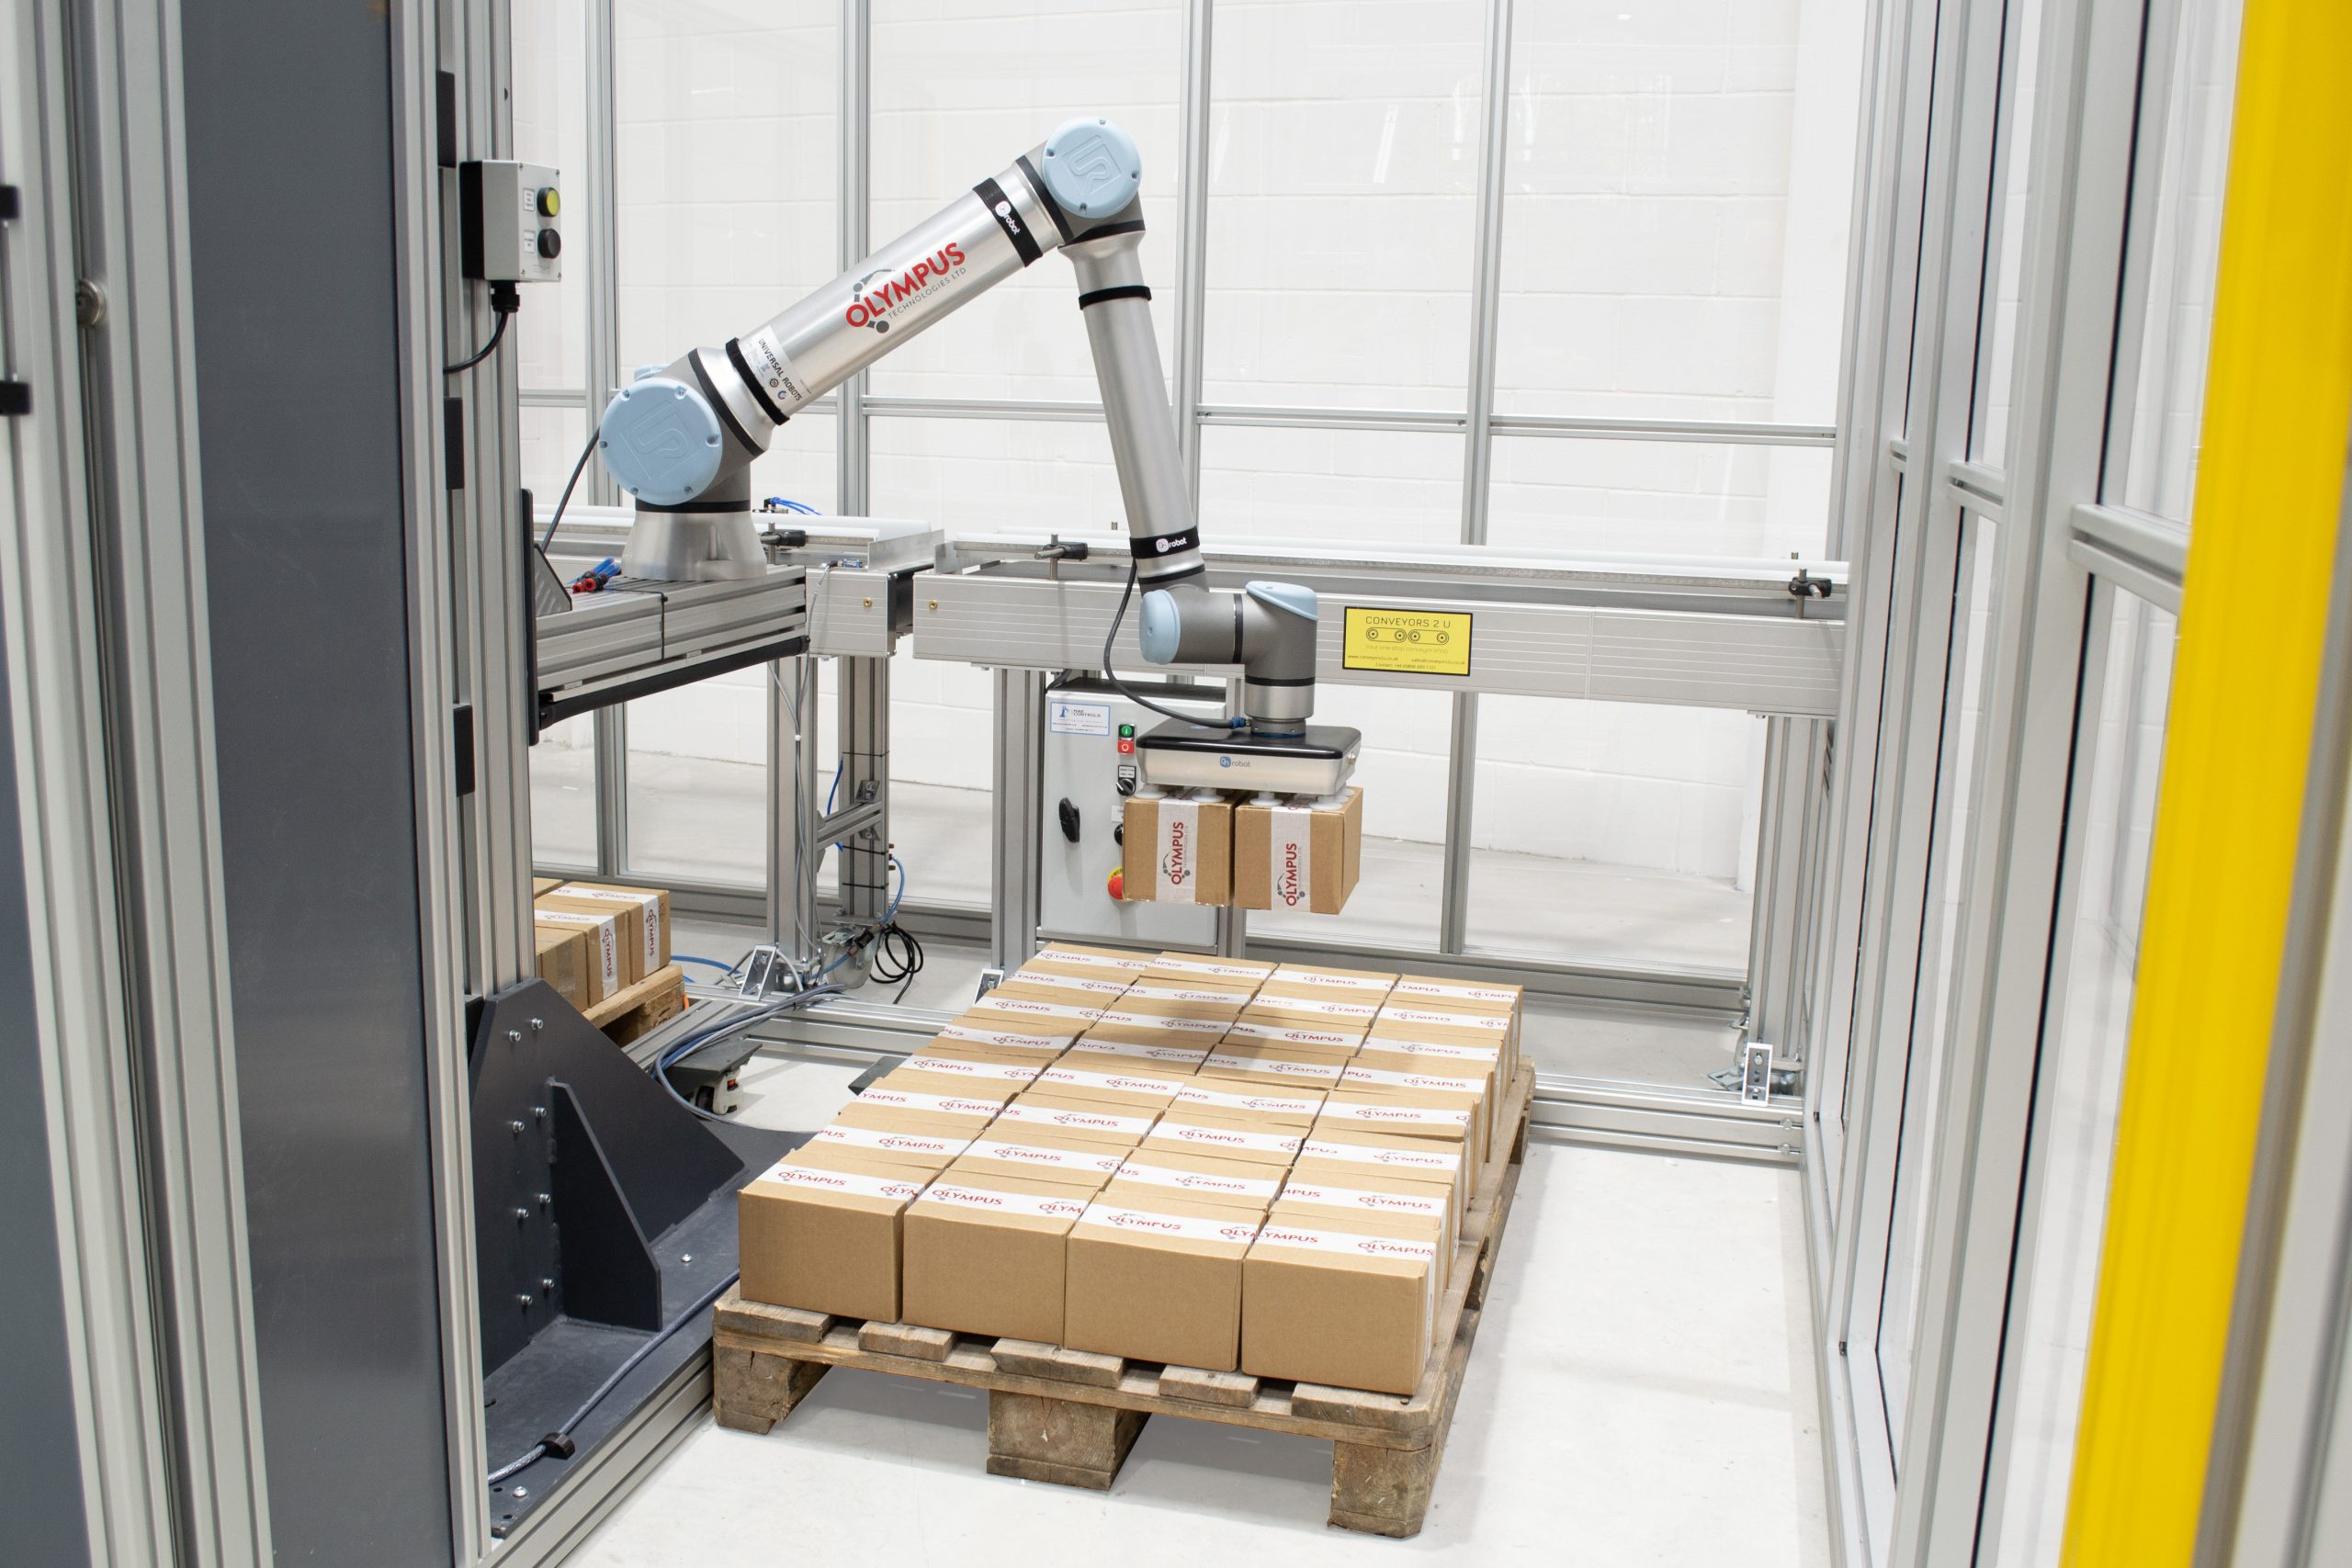 The Olympus UR20 Palletising System offers the smallest footprint cell whilst enabling the robot to safely palletise at its maximum cycles per minute.